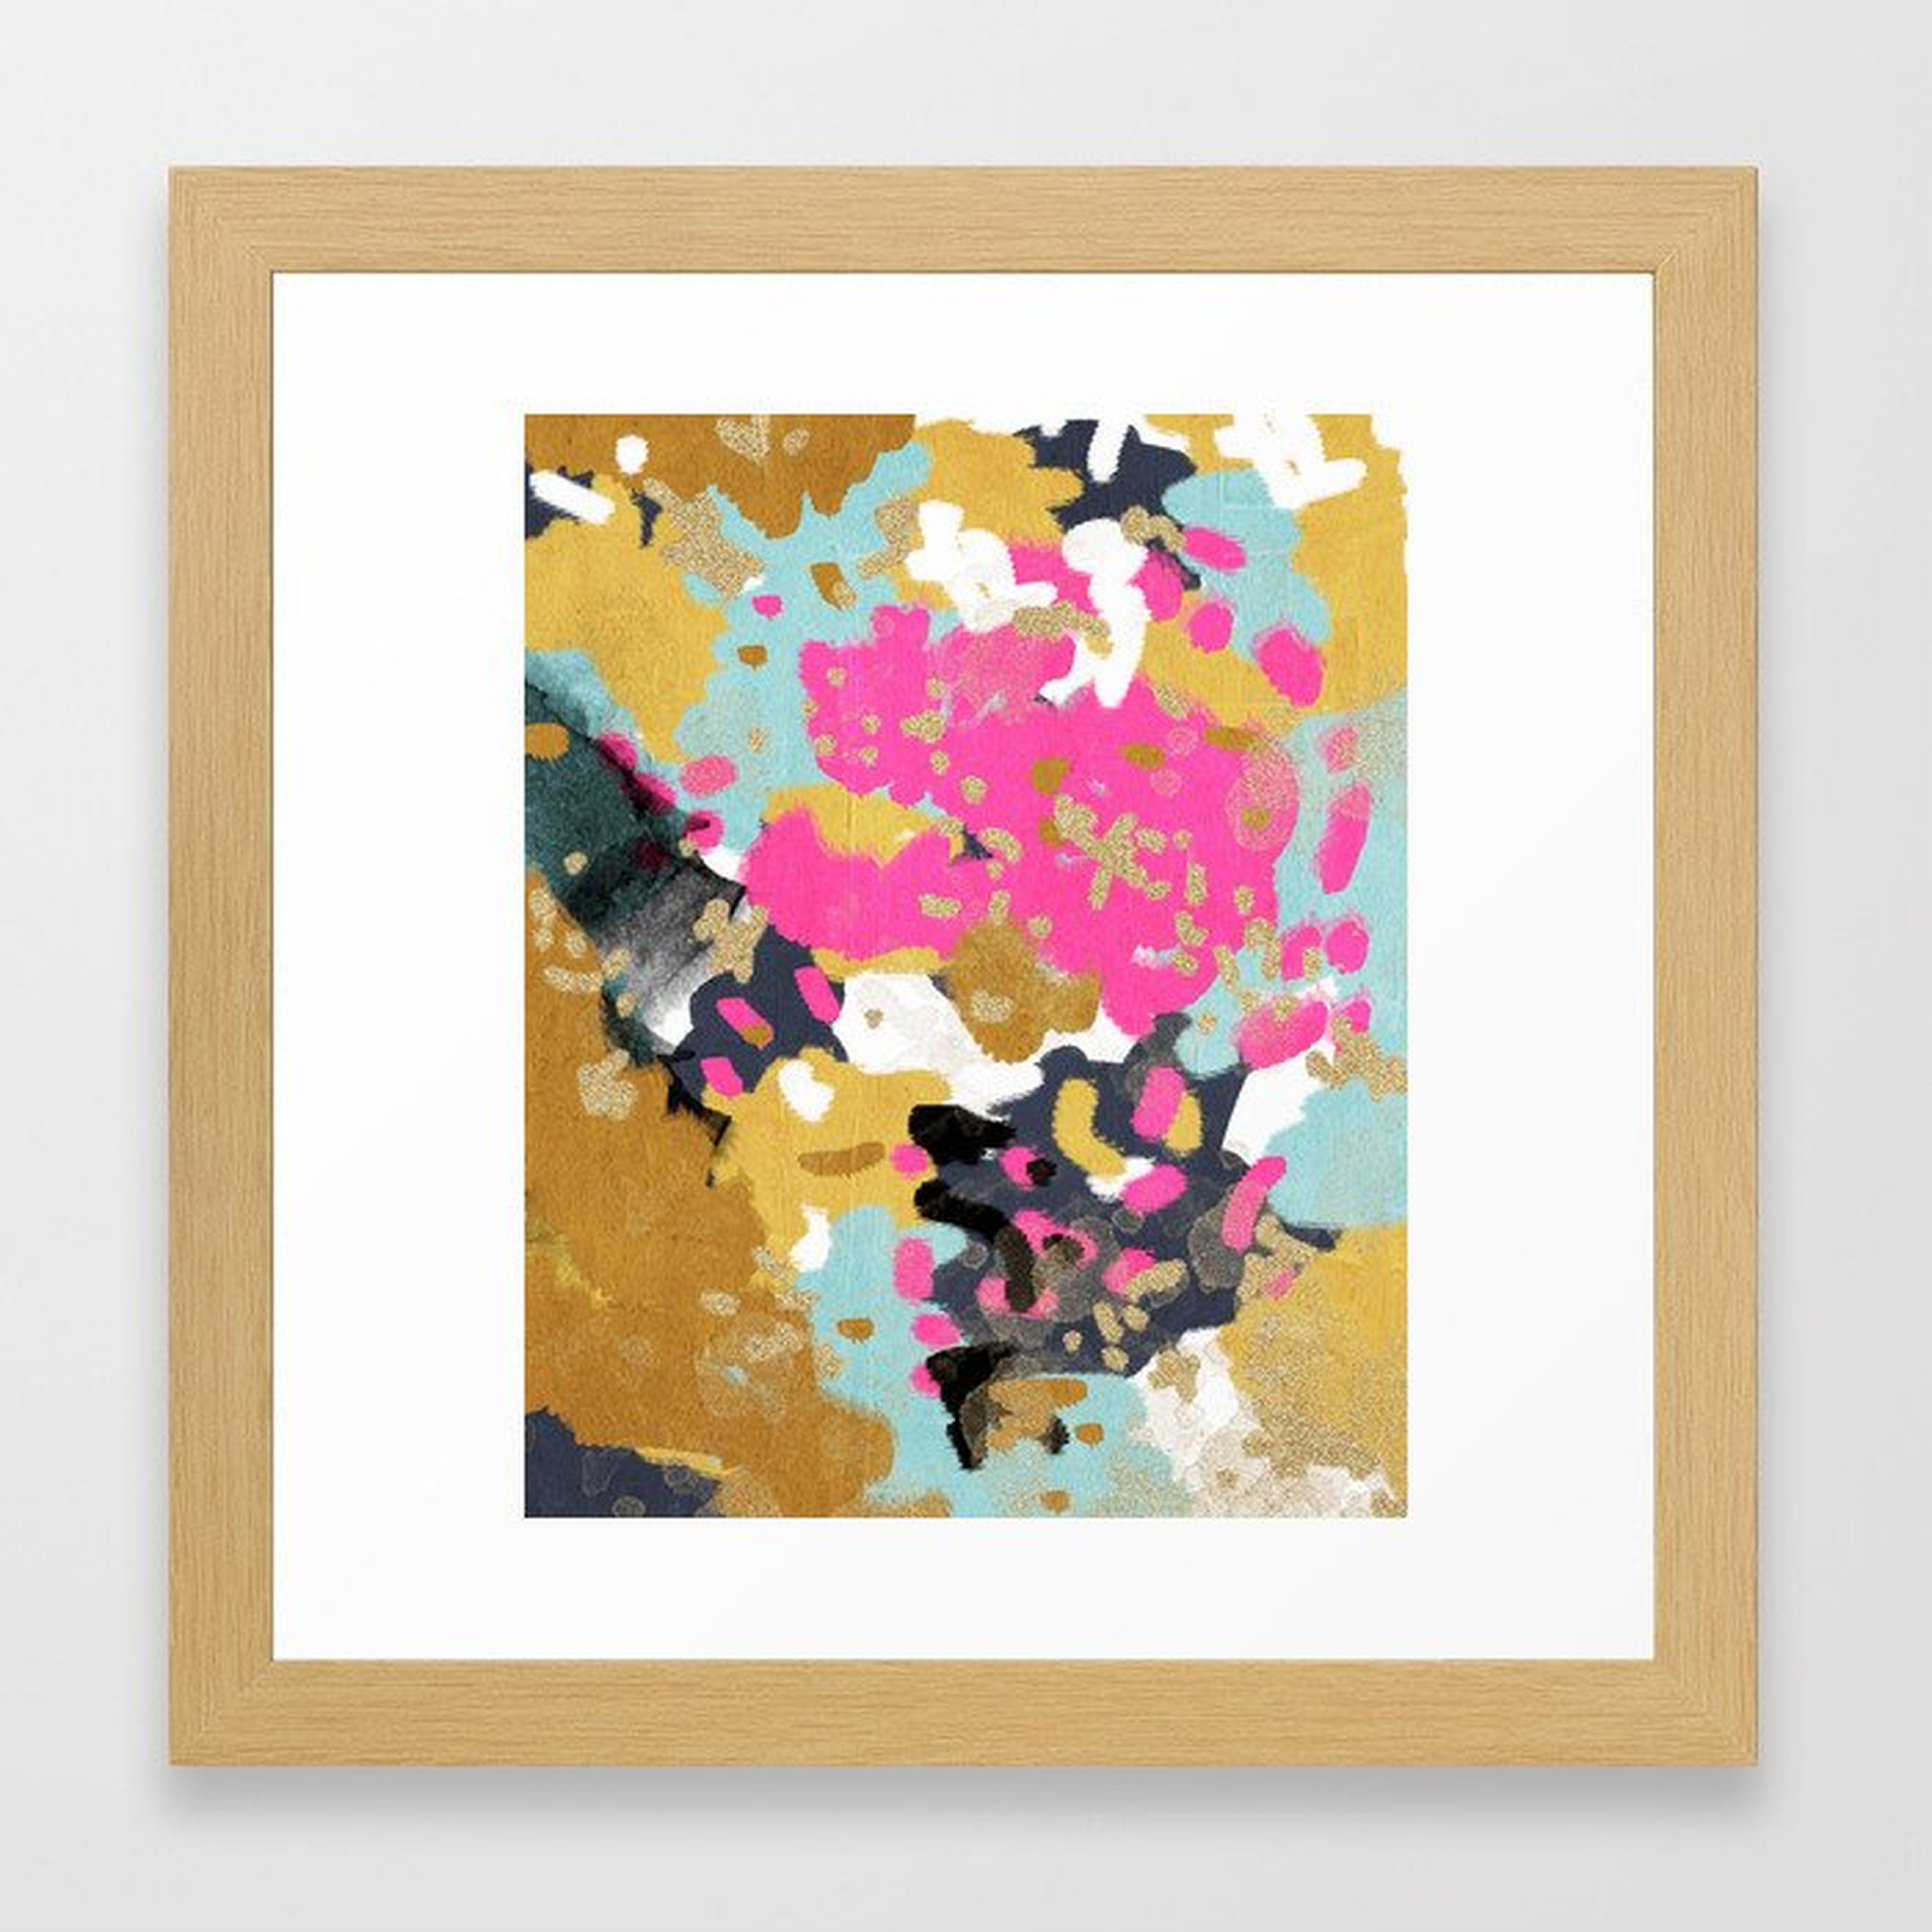 Laurel - Abstract Painting In A Free Style With Bold Colors Gold, Navy, Pink, Blush, White, Turquois Framed Art Print by Charlottewinter - Conservation Natural - X-Small-12x12 - Society6